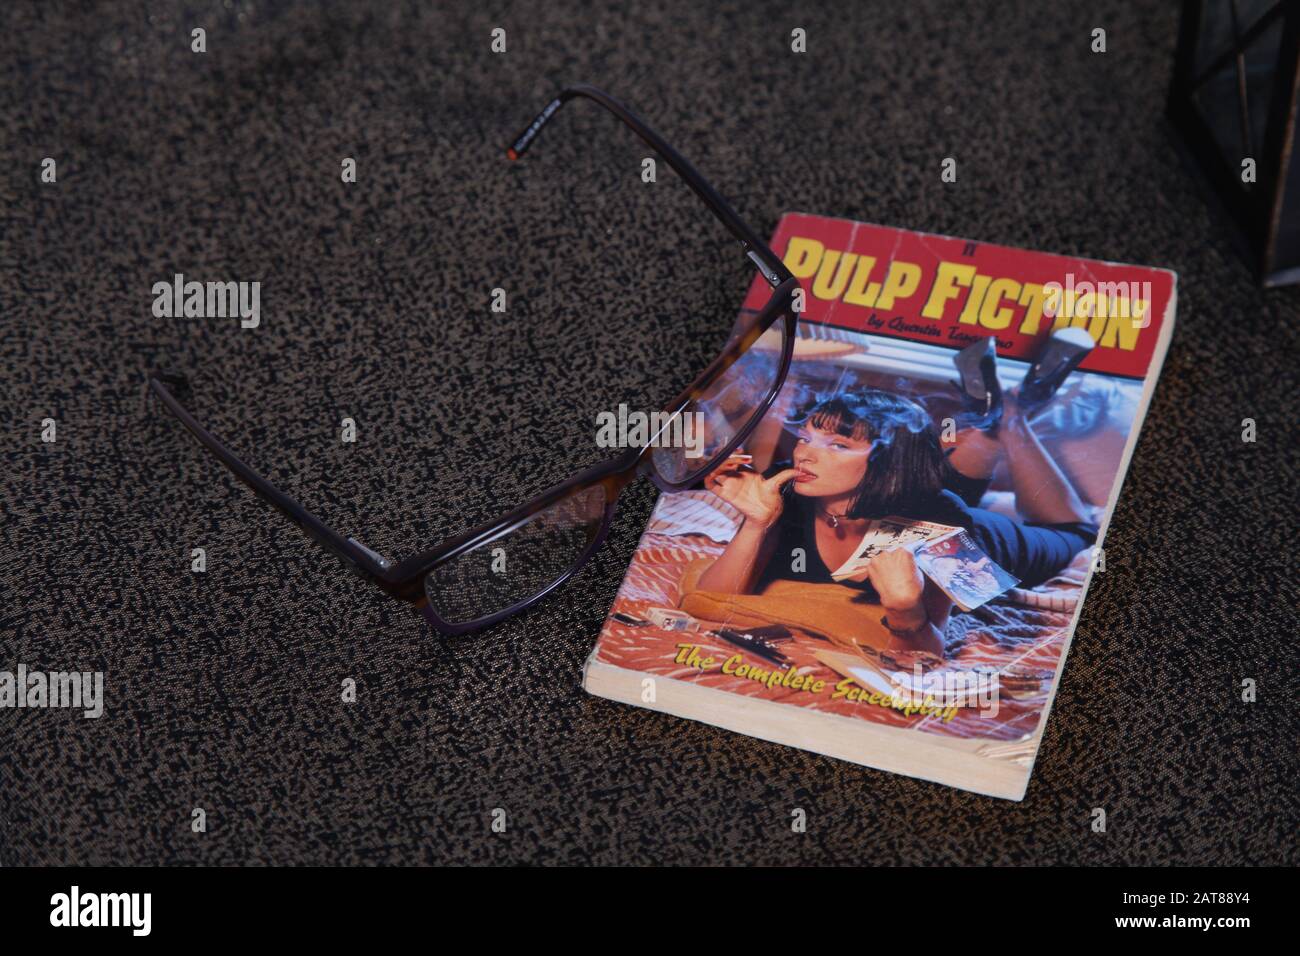 Pulp Fiction the Complete Screenplay crime noir paperback book, Instagram style with glasses spectacles Stock Photo